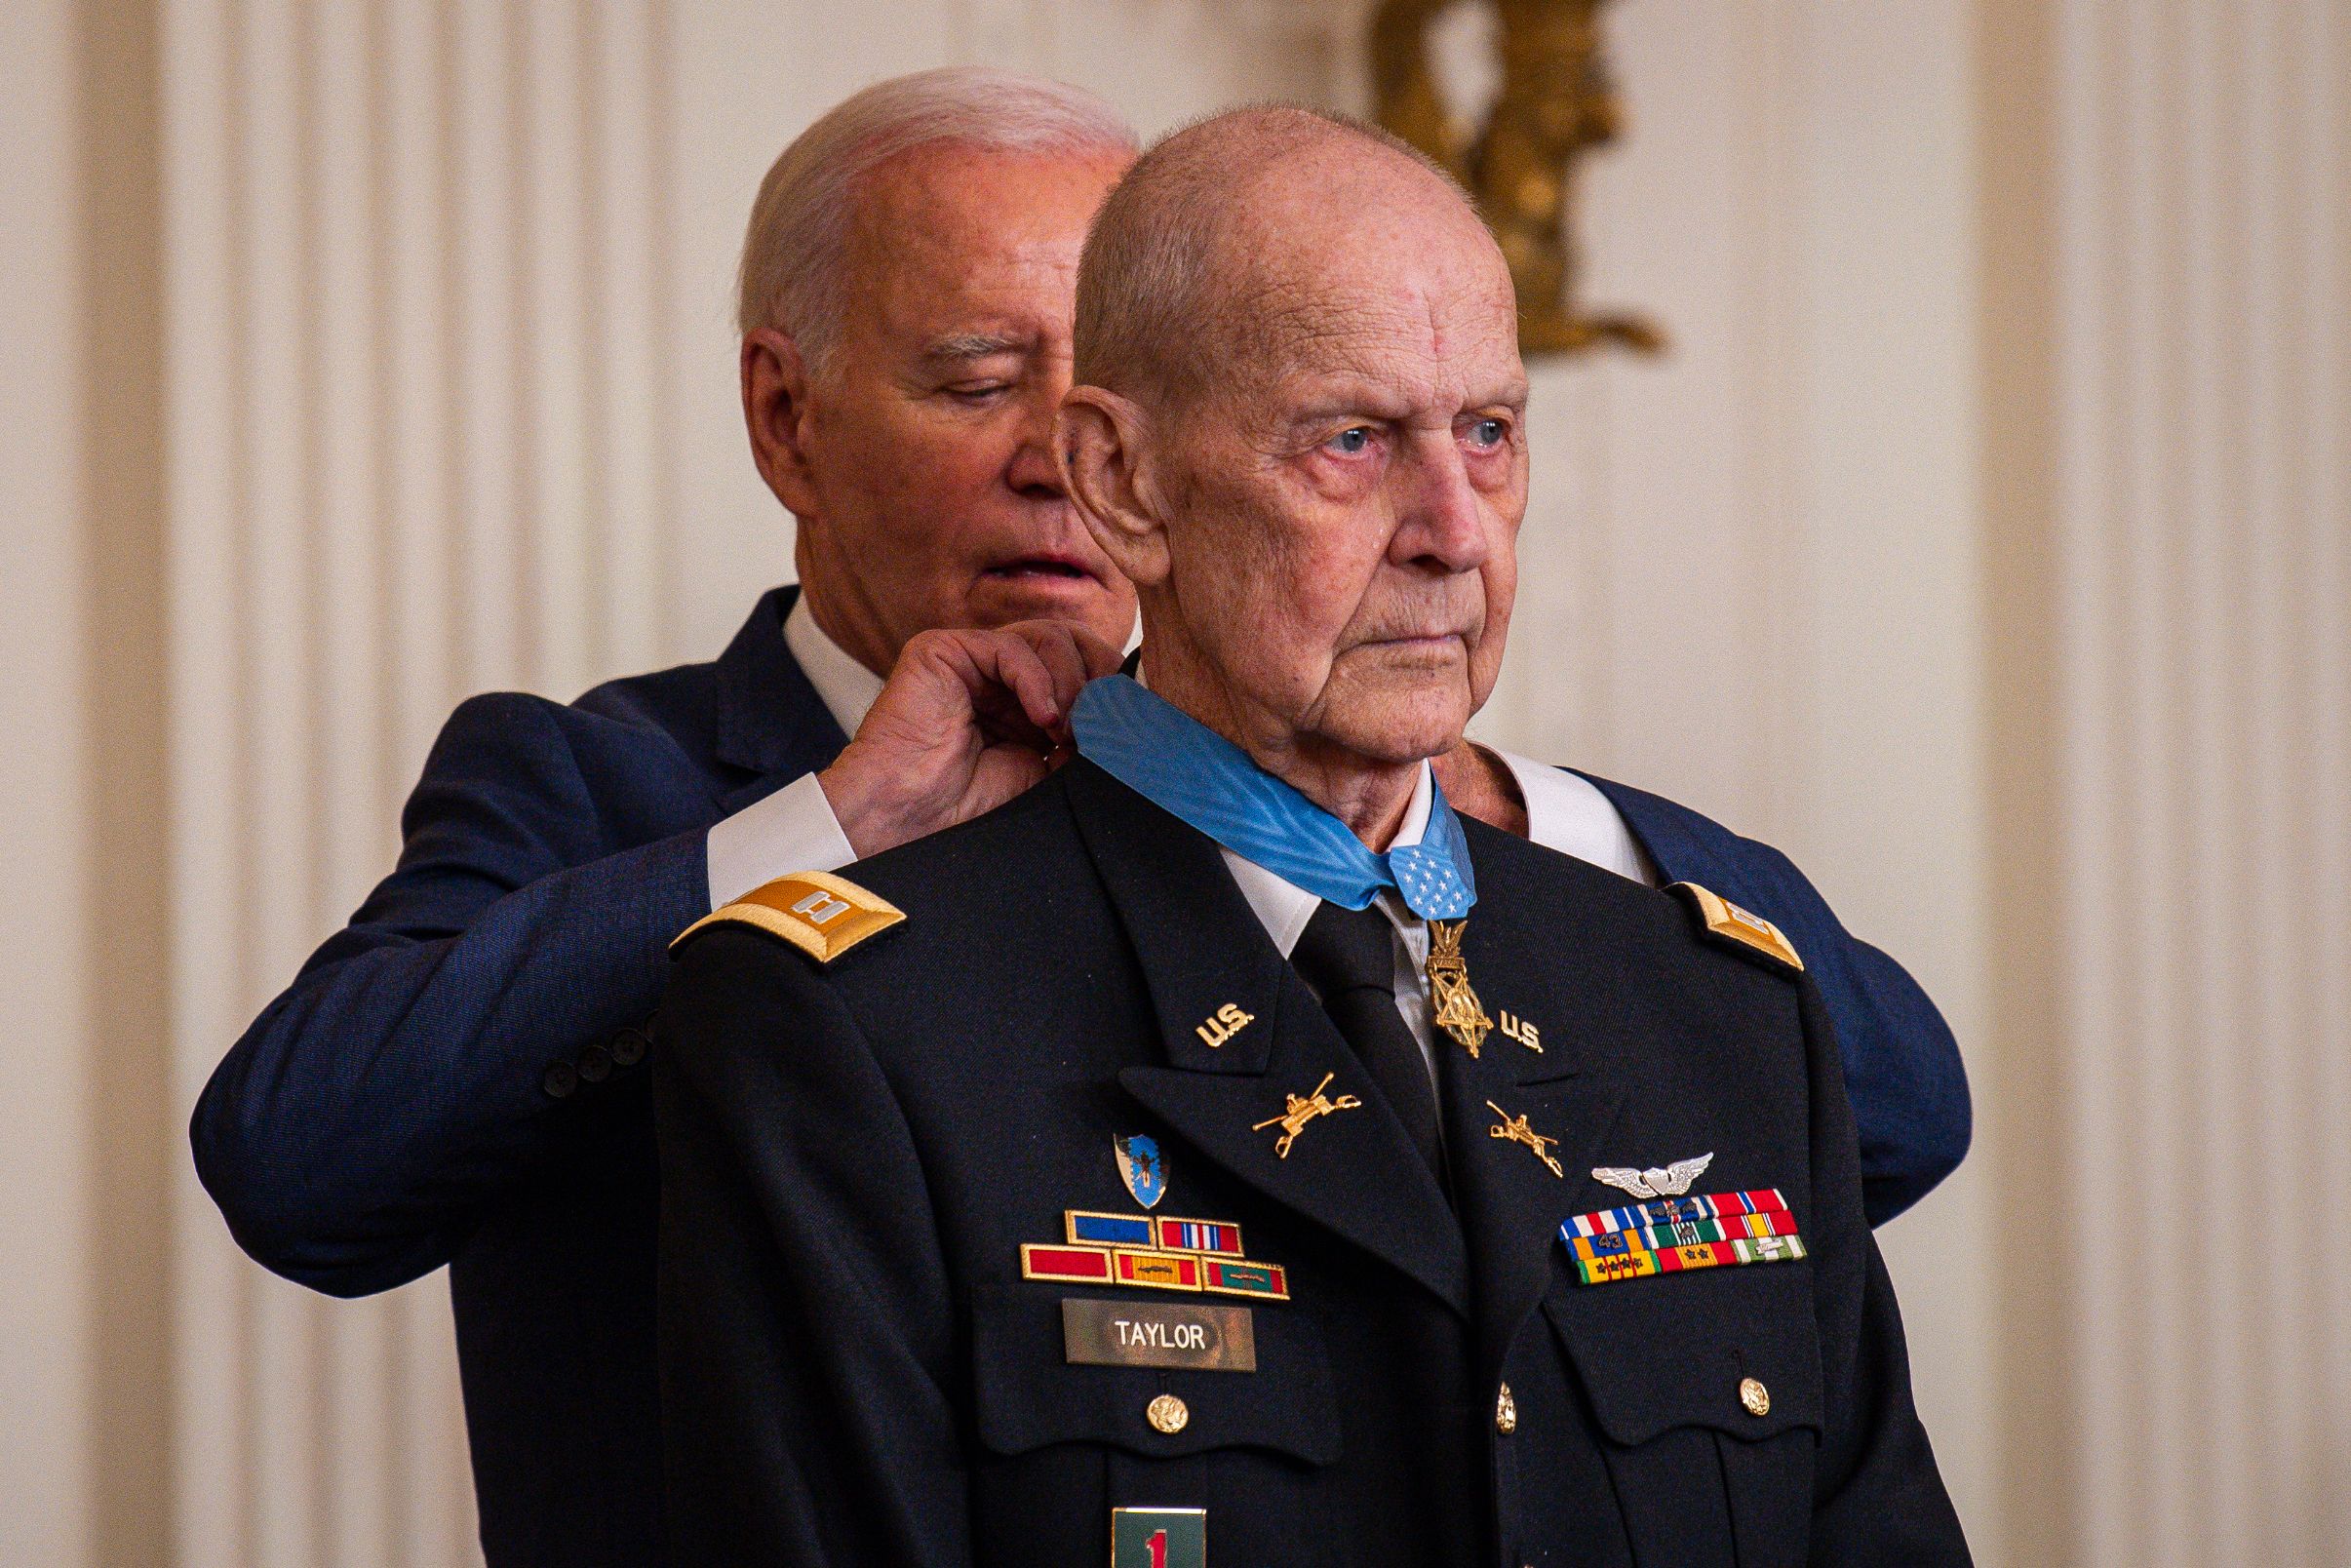 President Joseph R. Biden Jr. presents the Medal of Honor to former U.S. Army Capt. Larry L. Taylor during a ceremony at the White House in Washington, D.C., Sept. 5, 2023.